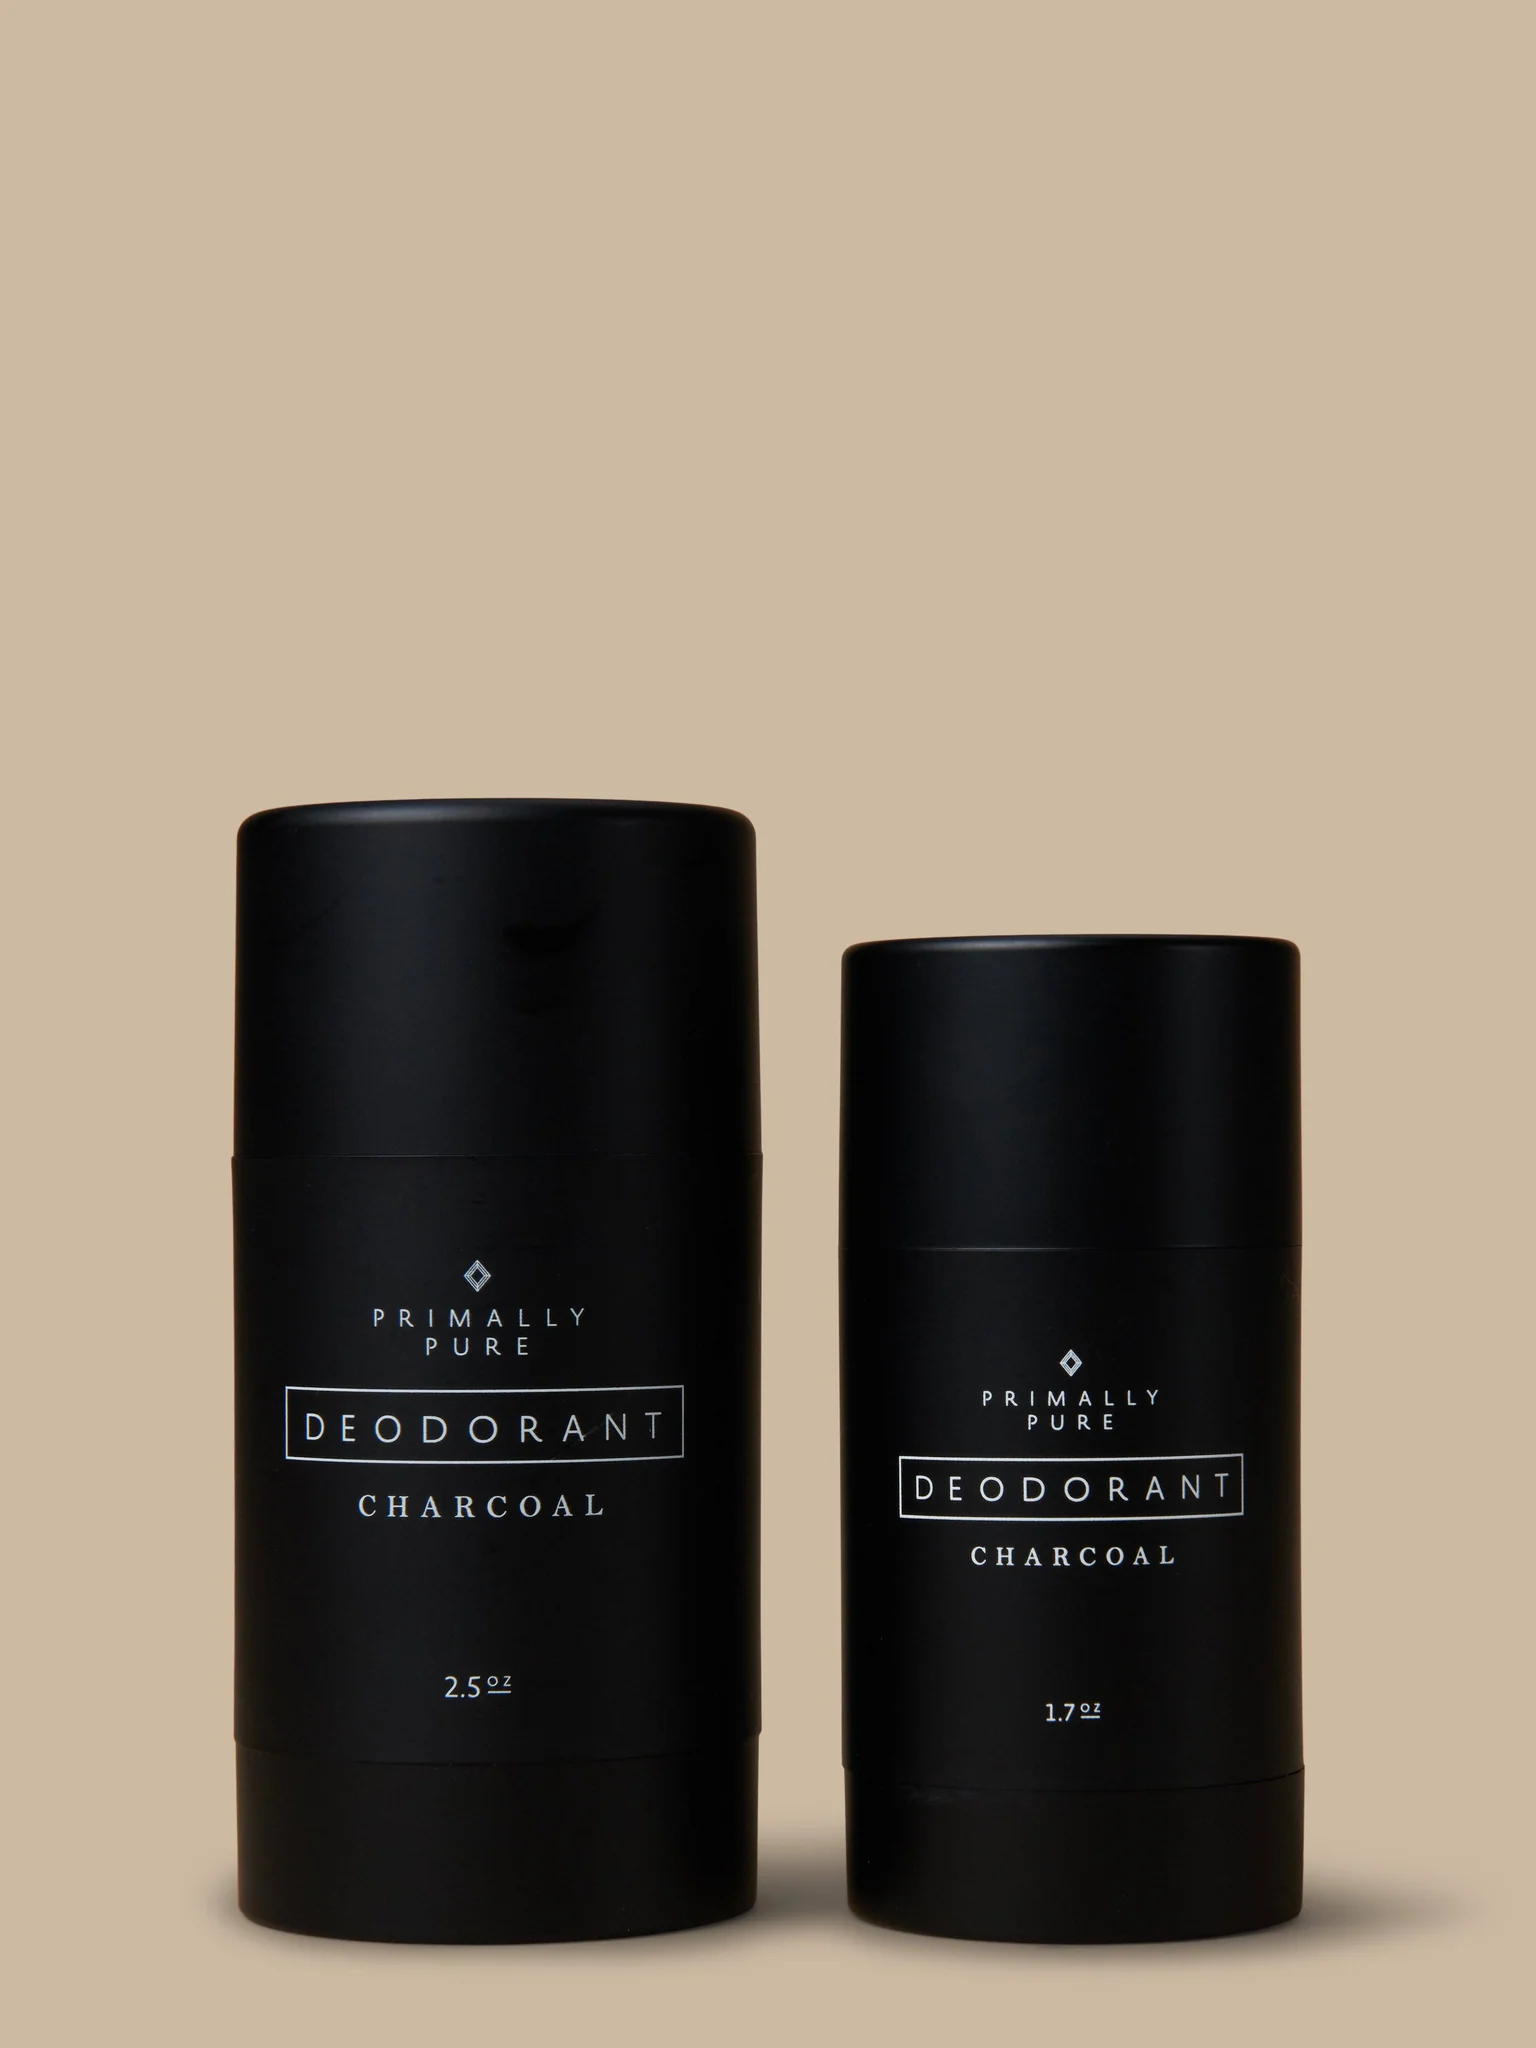 Two tubes of Primally Pure deodorant.